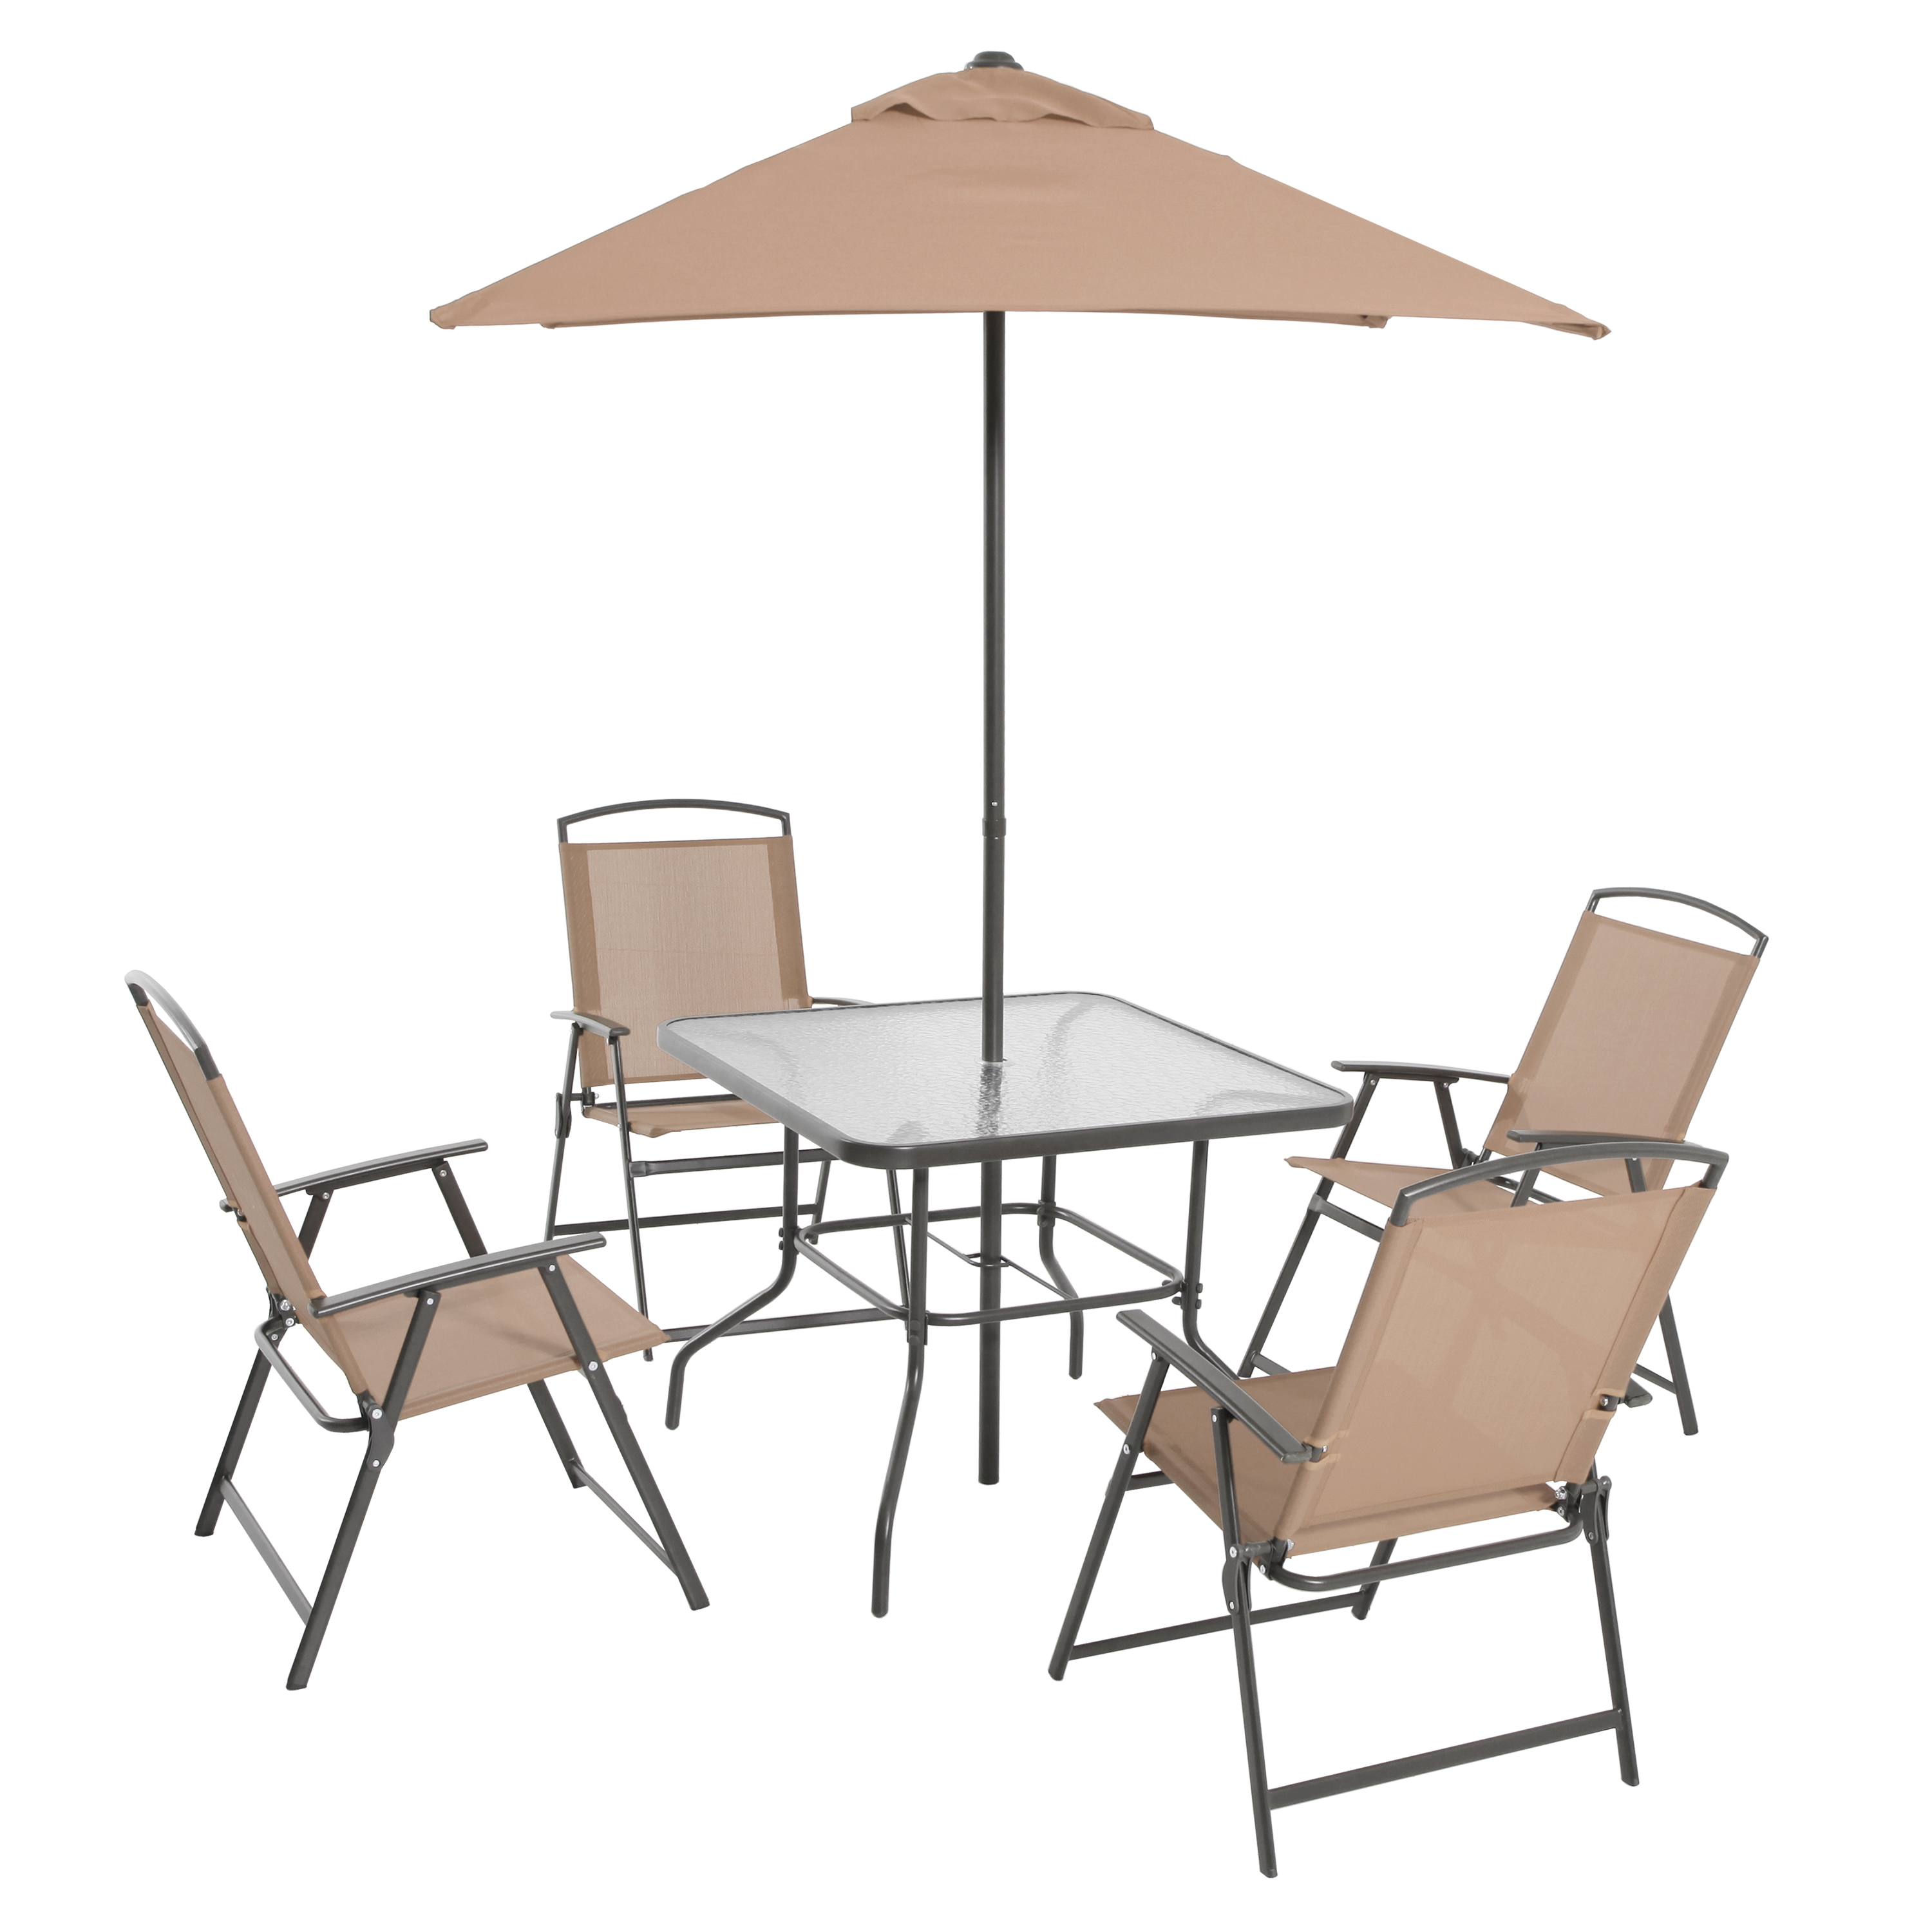 Mainstays Albany Lane Steel Outdoor Patio Dining Set of 6, Tan - image 4 of 17